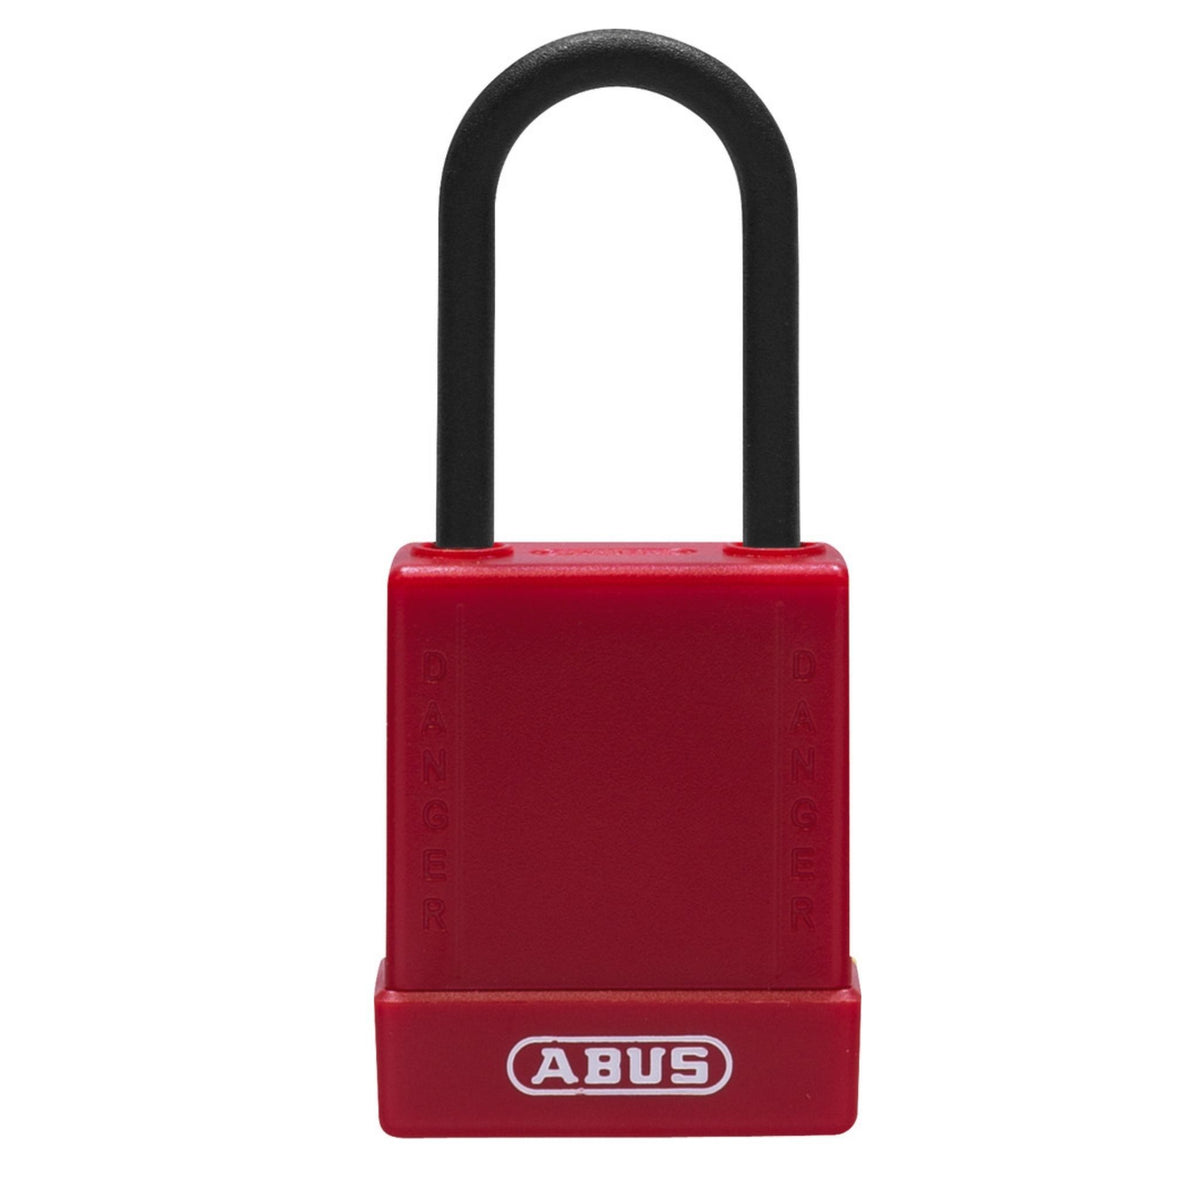 Abus 76/40 Red High Security Lockout Tagout Safety Locks - The Lock Source